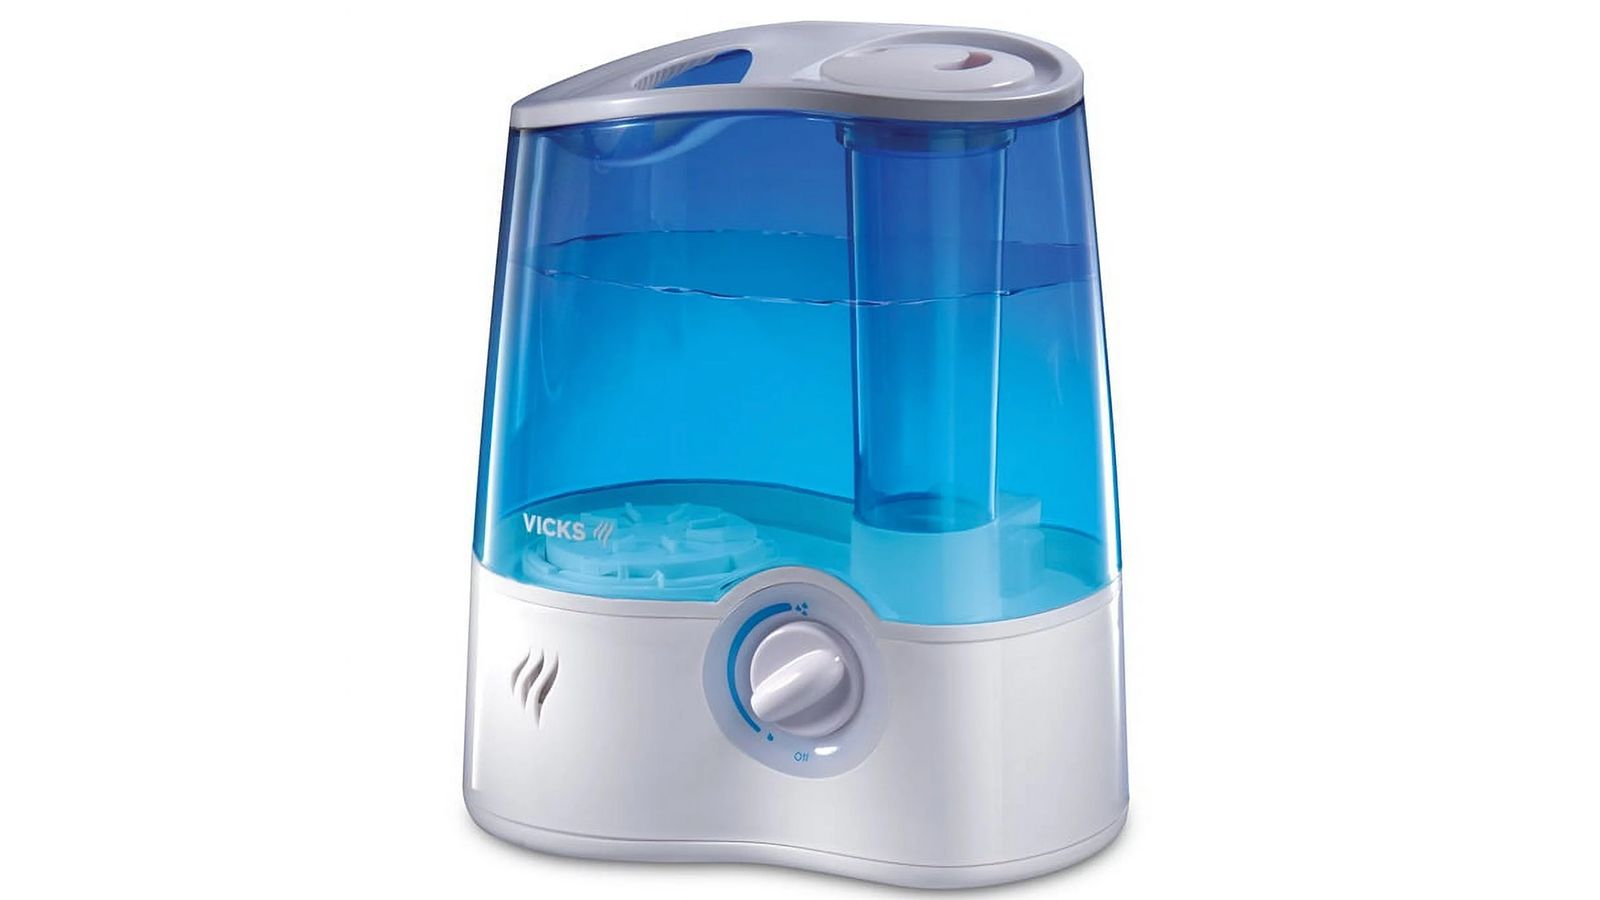 The Best Humidifiers for a More Comfortable Home - Buy Side from WSJ